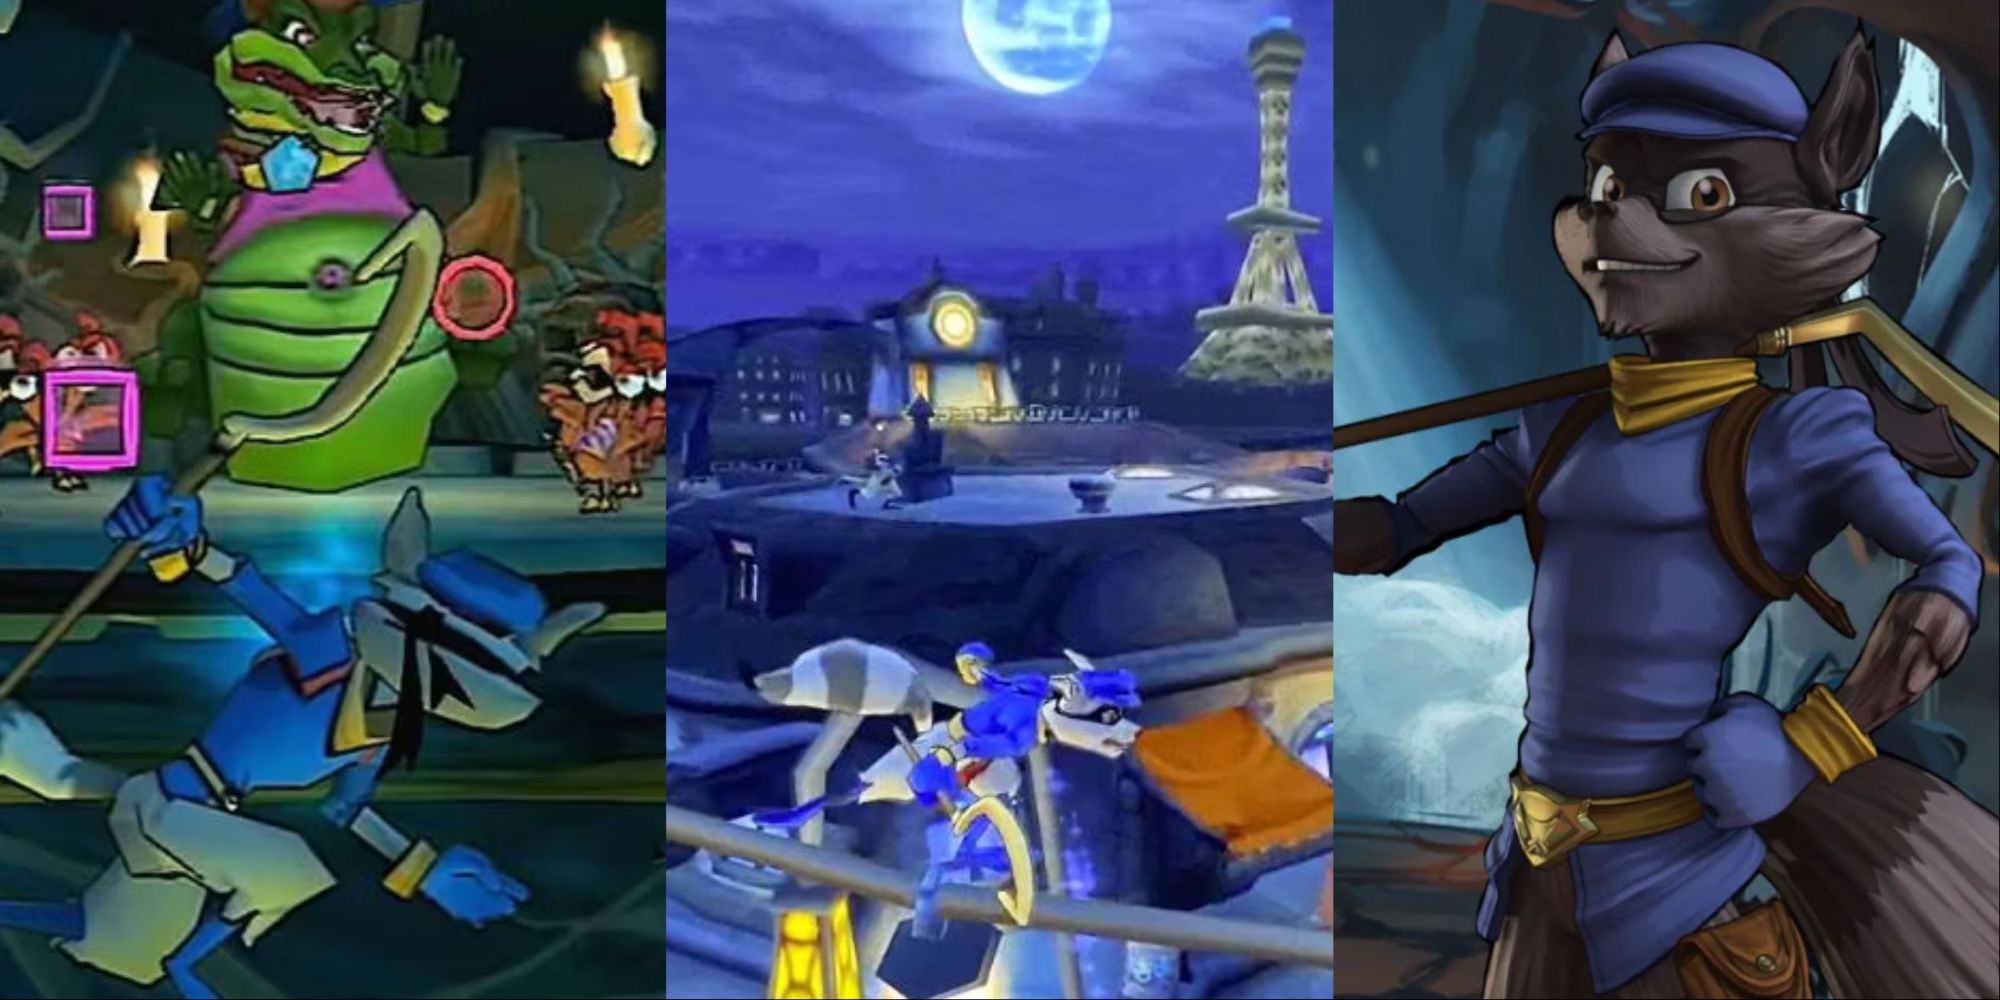 A collage showing gameplay of three different Sly Cooper titles.